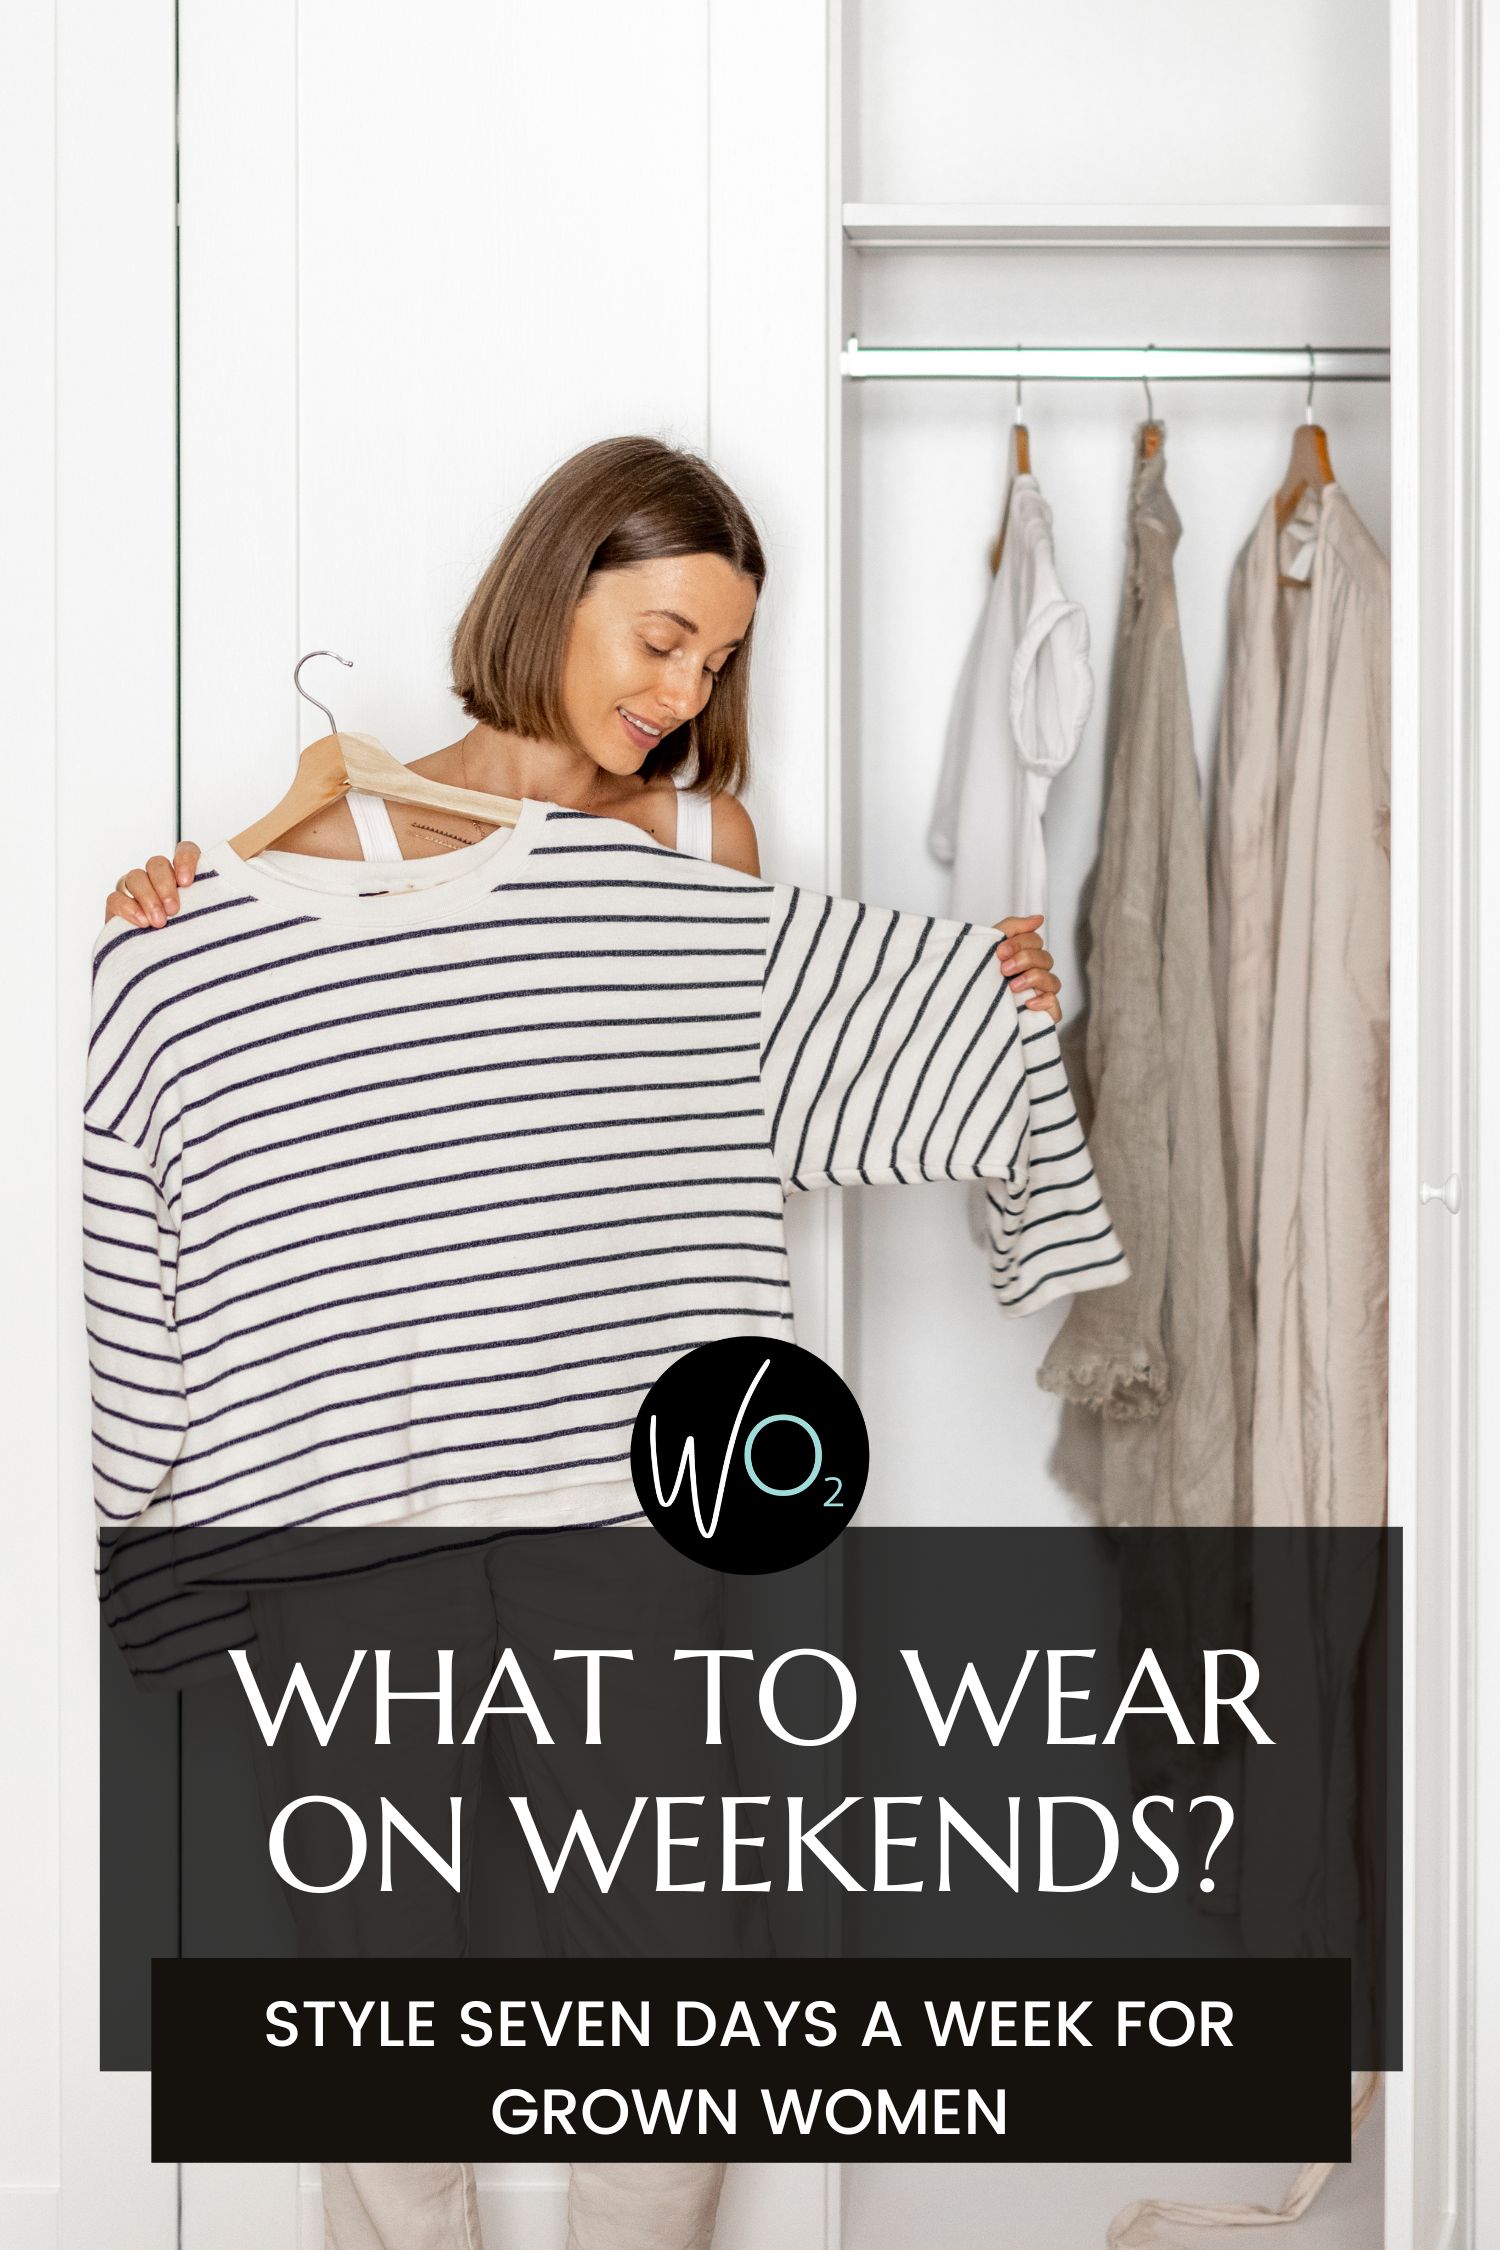 What to Wear on Weekends?